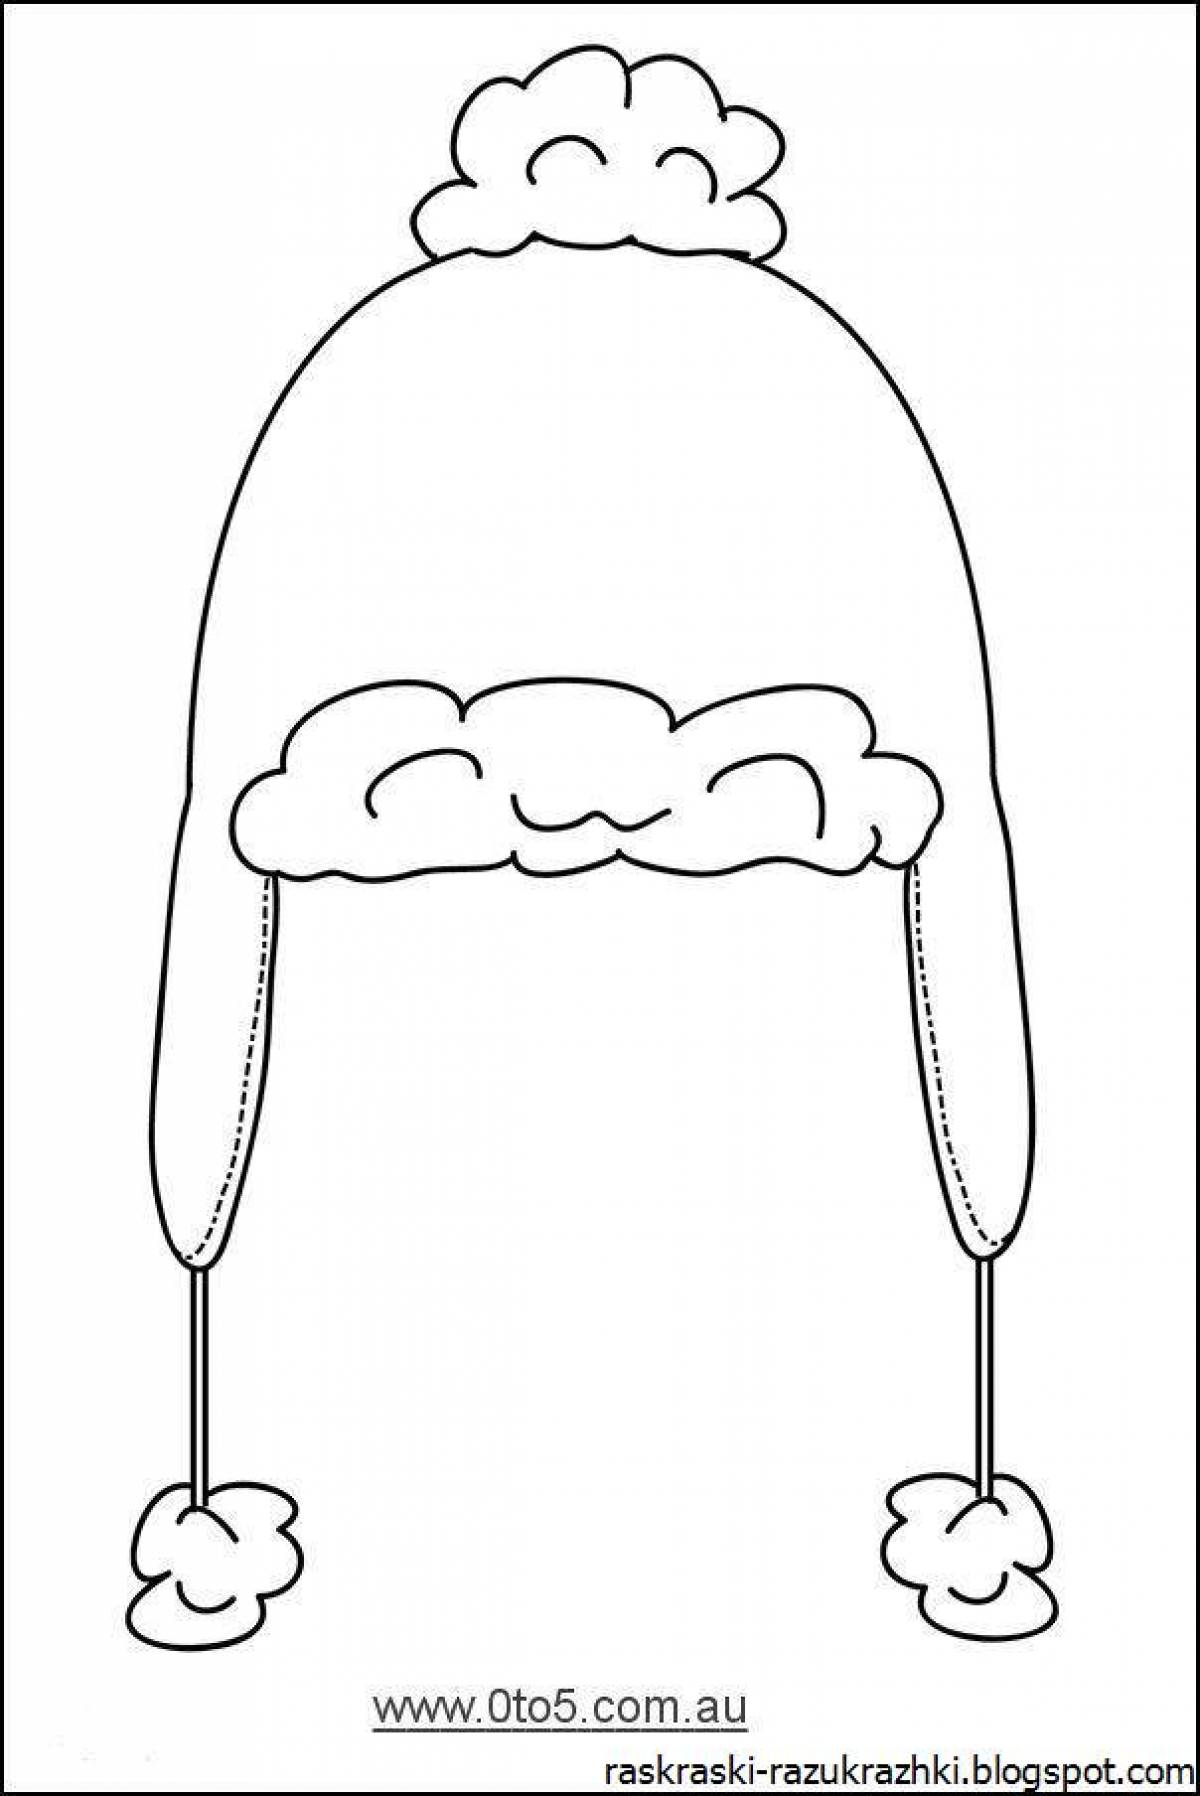 Colorific hat coloring page for kids